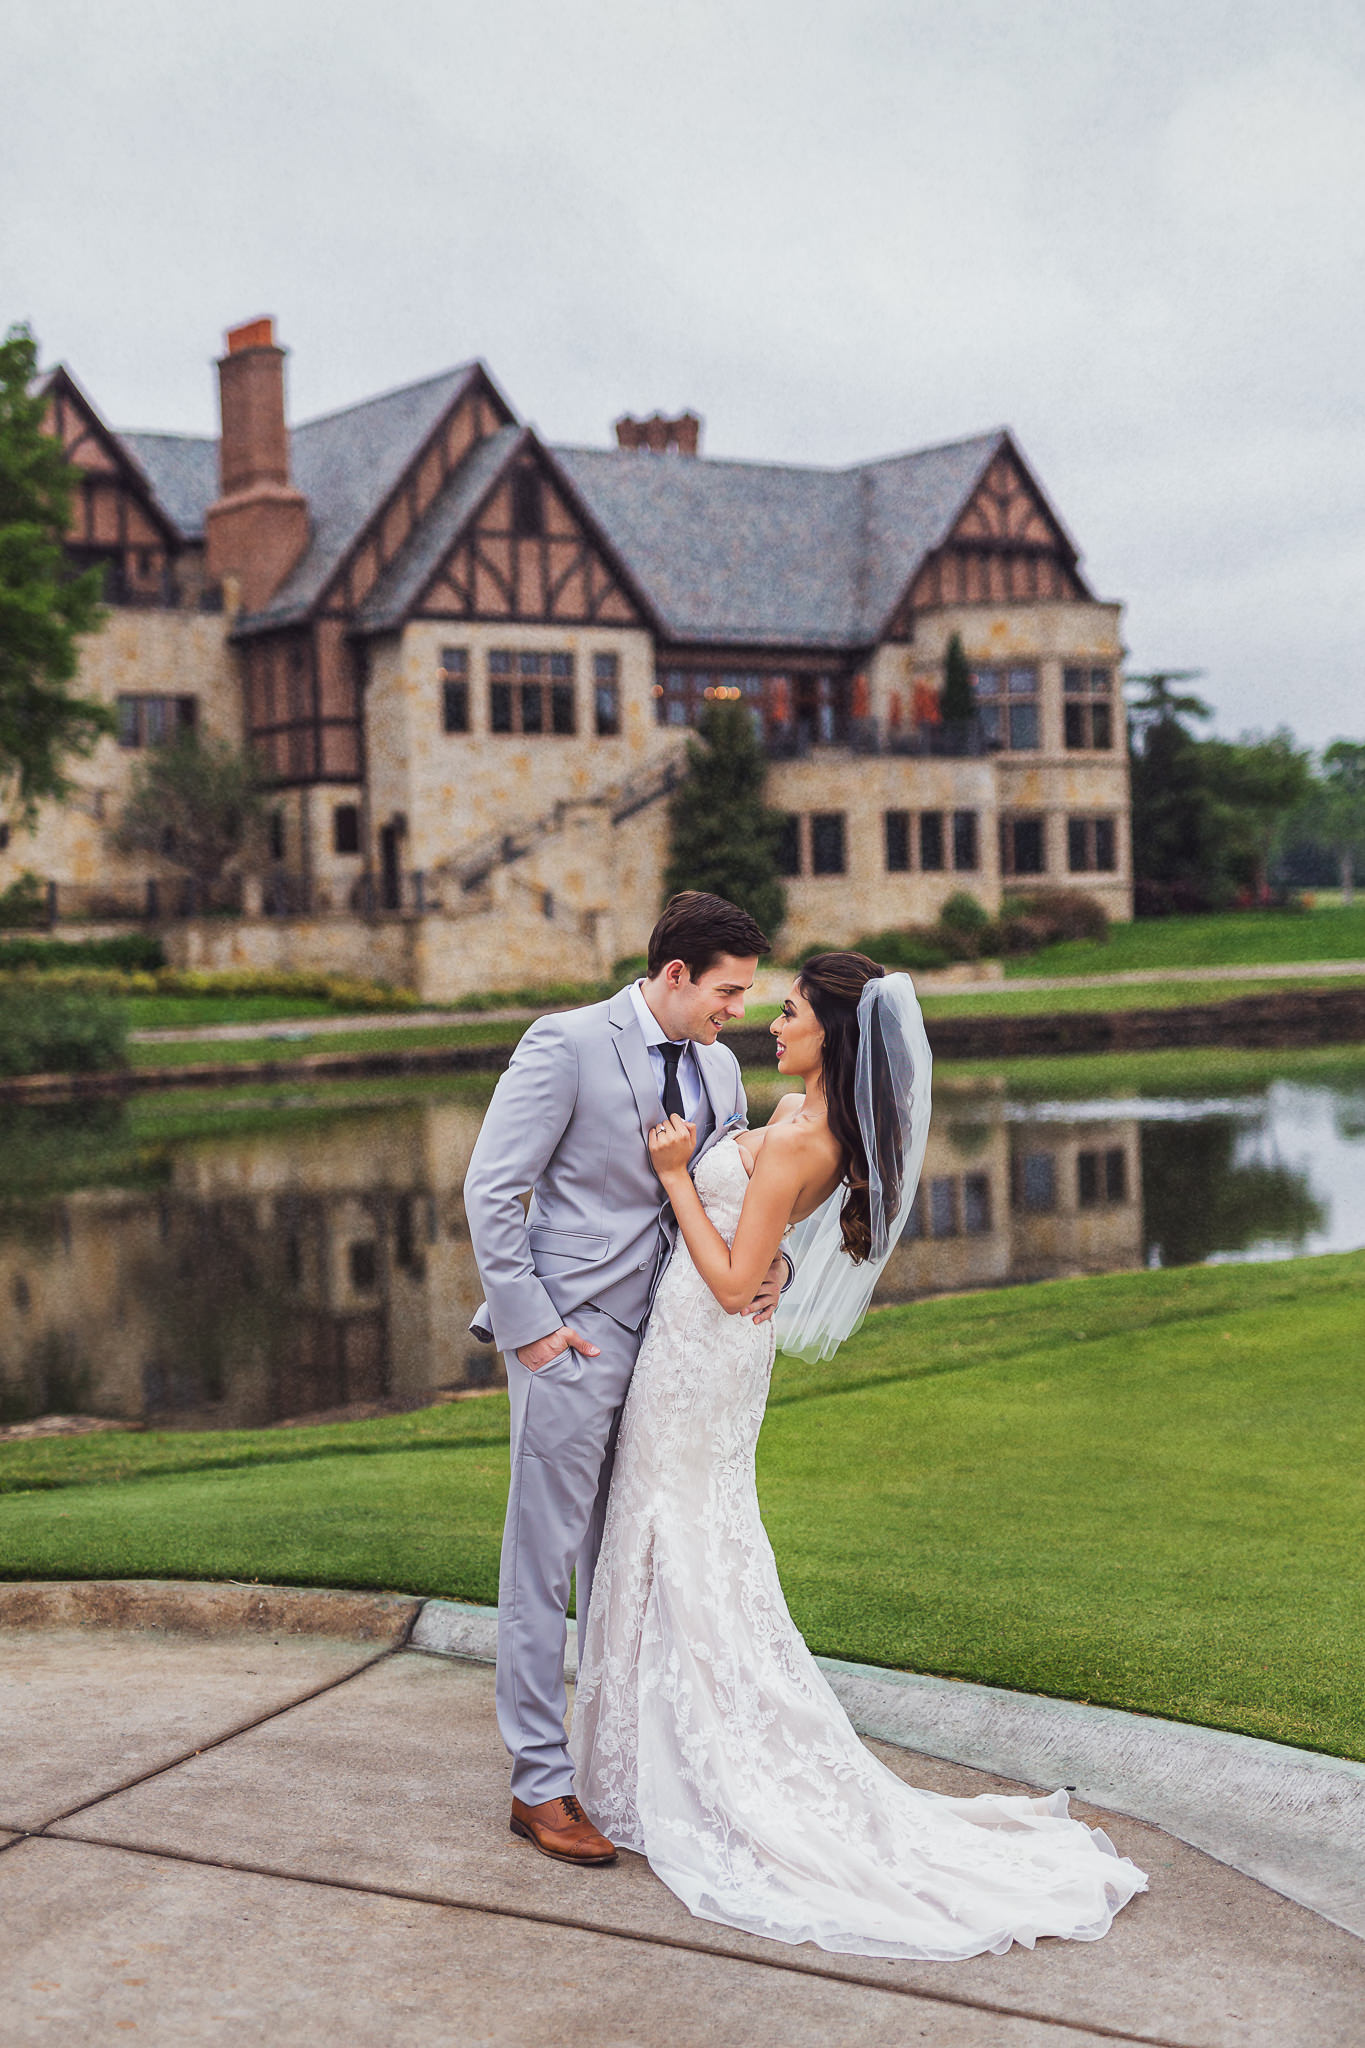 A couple is standing in front of a Dallas wedding venue estate. They are facing each other, and the groom has his hand on the bride's waist, dipping her slightly.